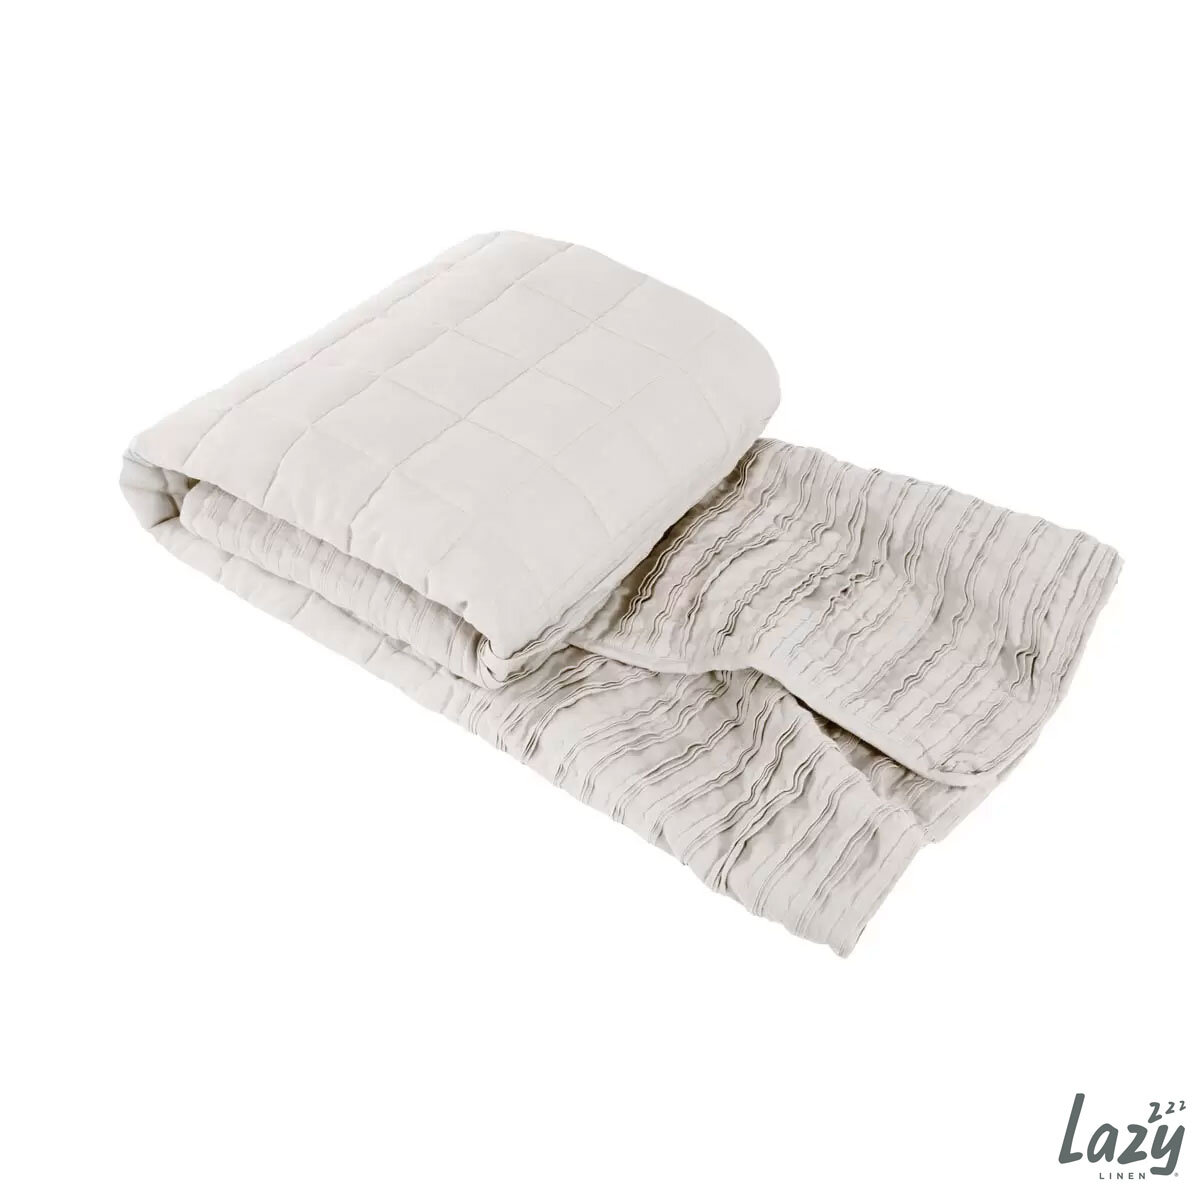 Lazy Linen 100% Washed Linen Throw in White